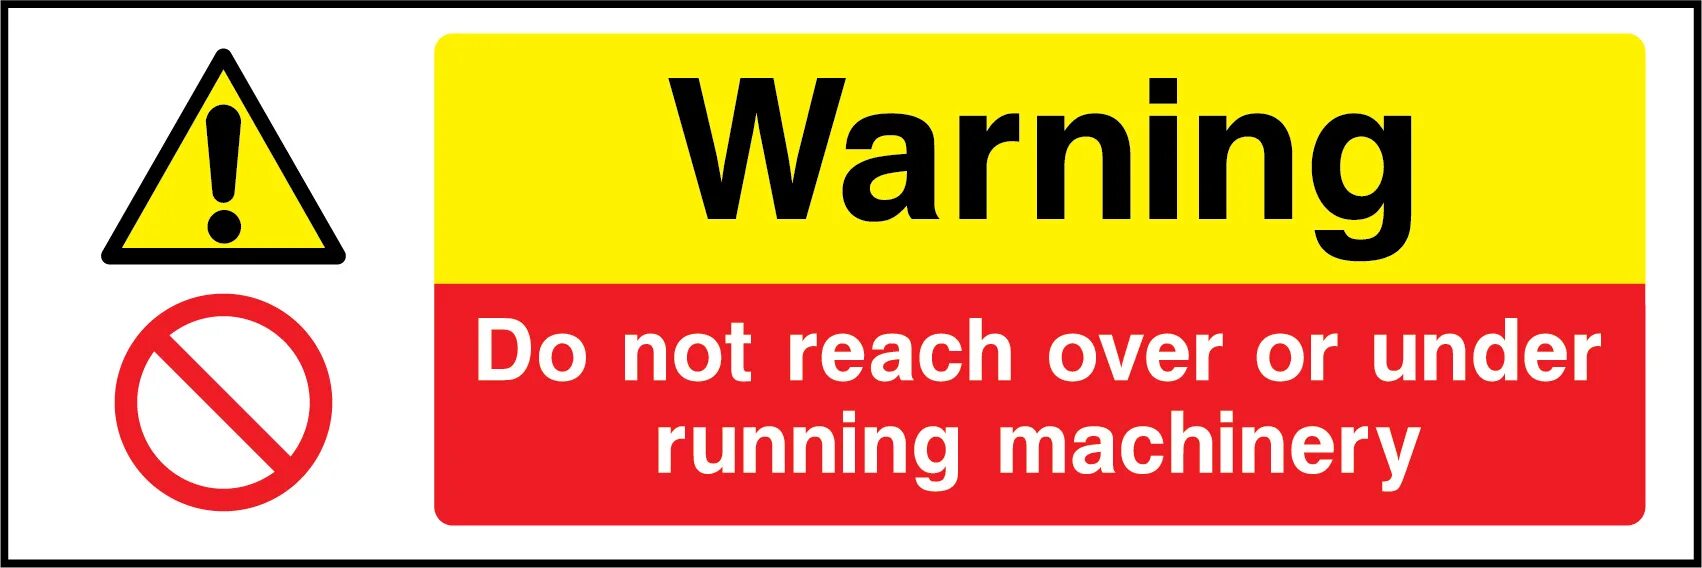 Do not carry out Maintenance work on Running Machinery. Знак do not carry. Знаки Warning Machinery operating. Warning сообщение. Content warning перевод